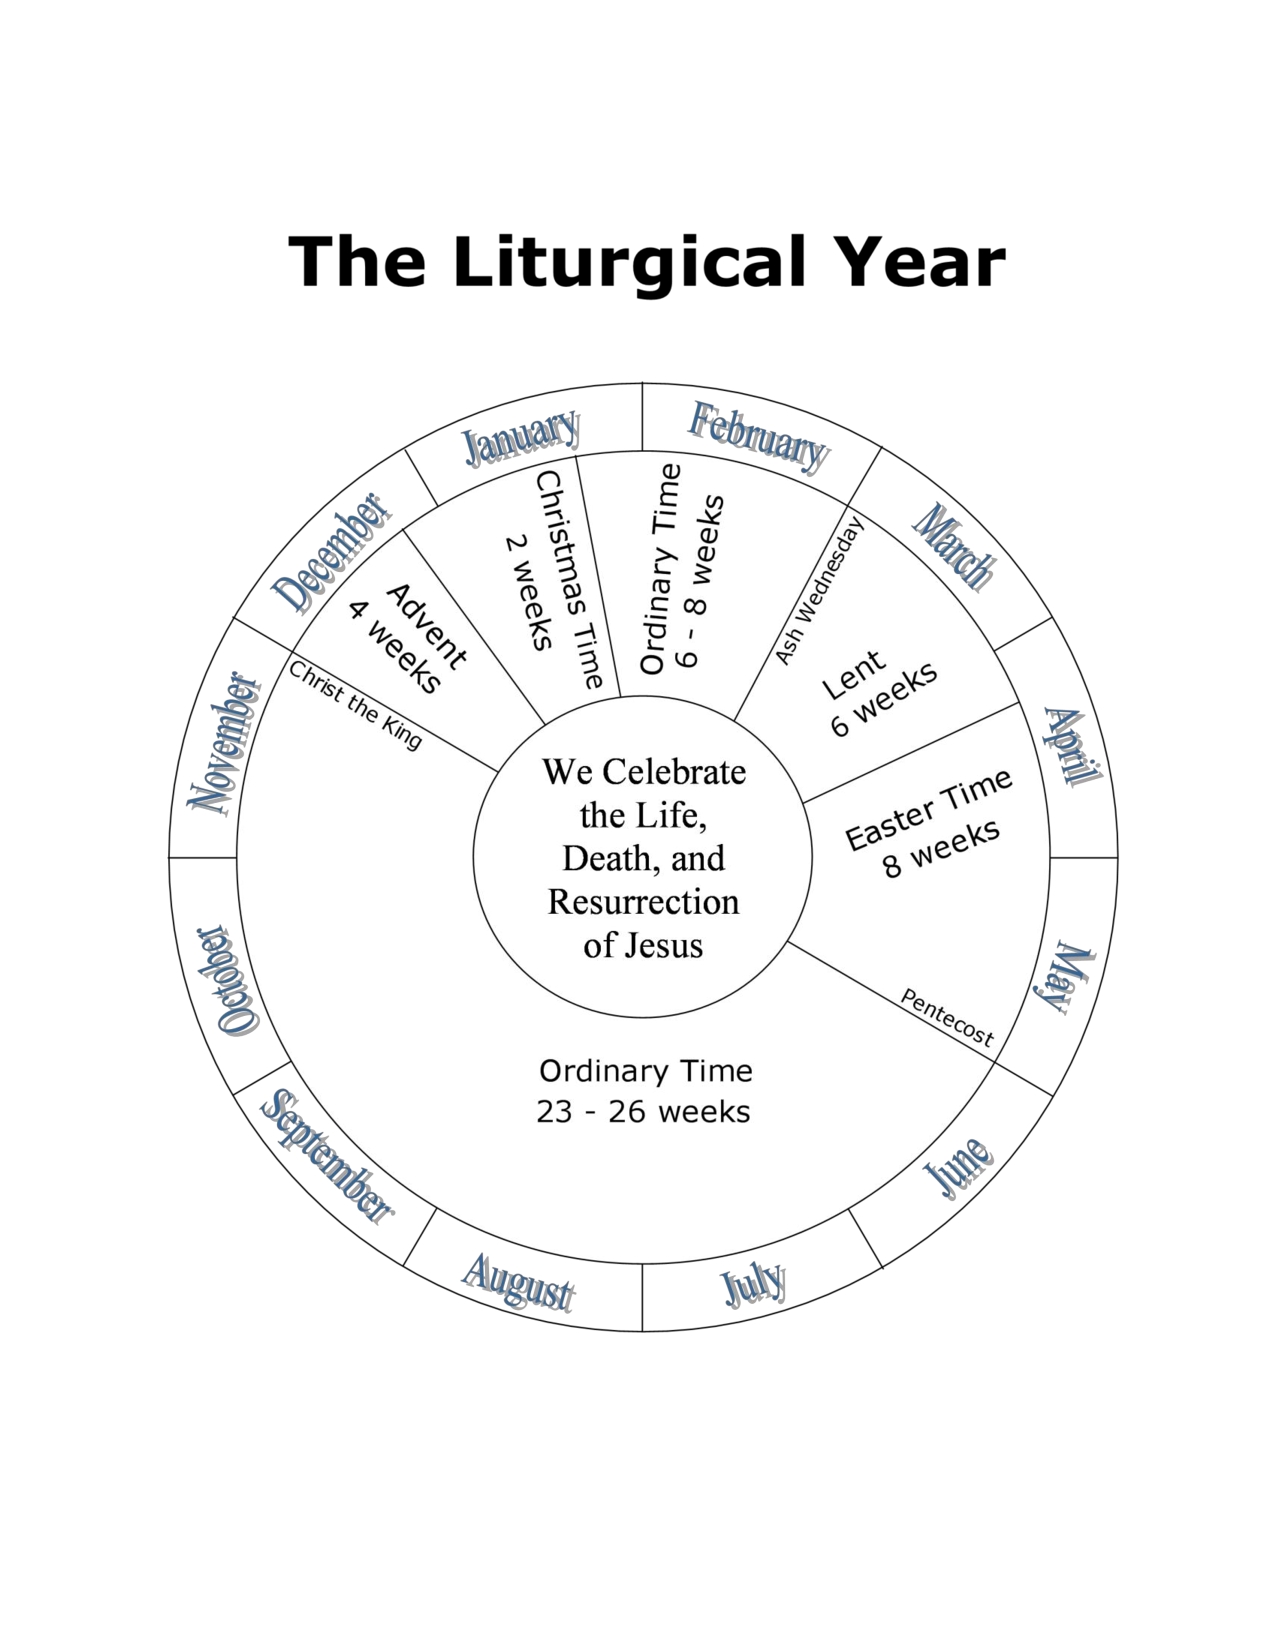 Pin On Liturgical Year in Dates Of The Liturgical Calendar